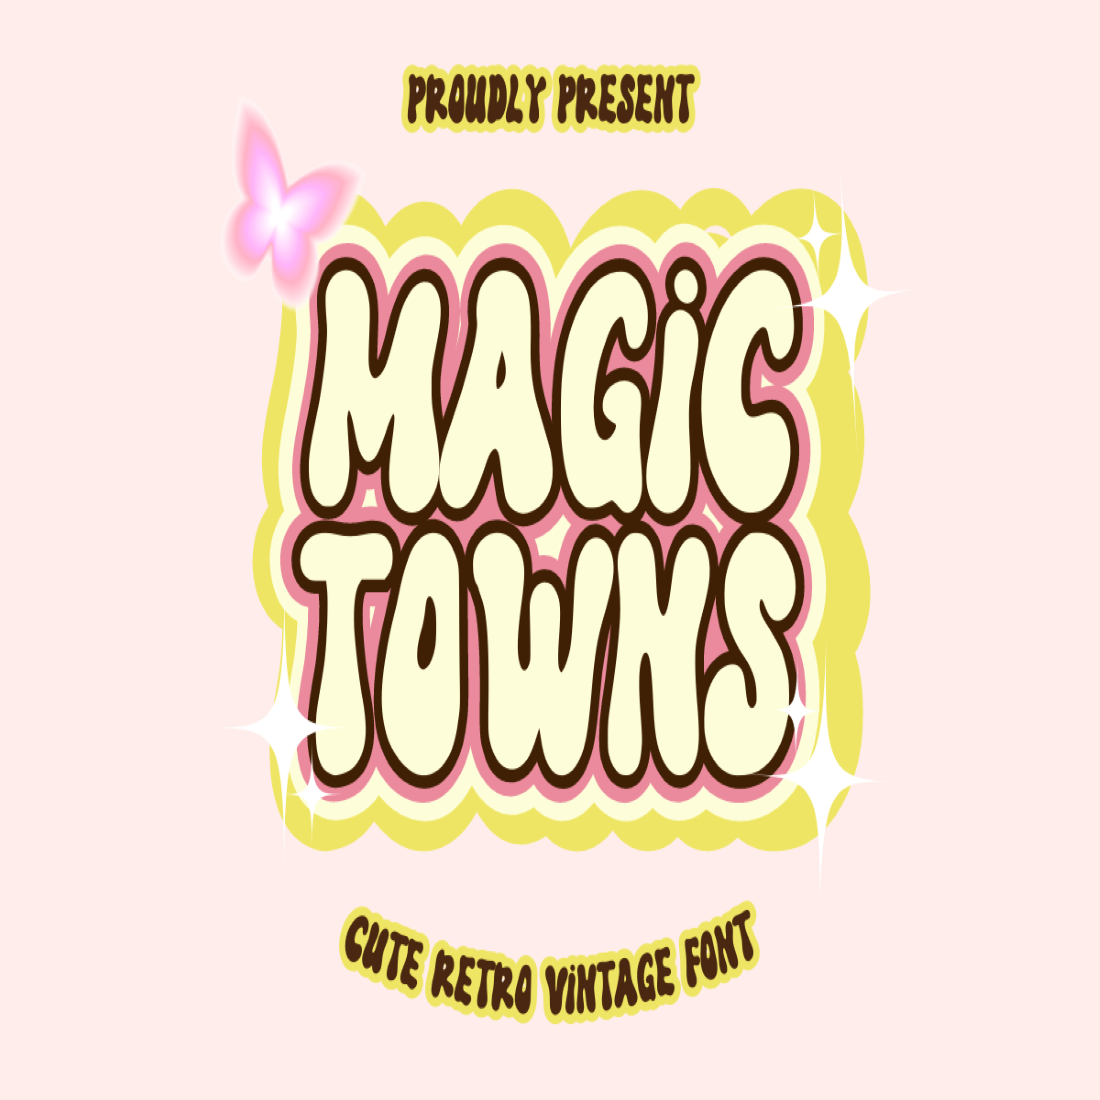 Magic Towns cover image.